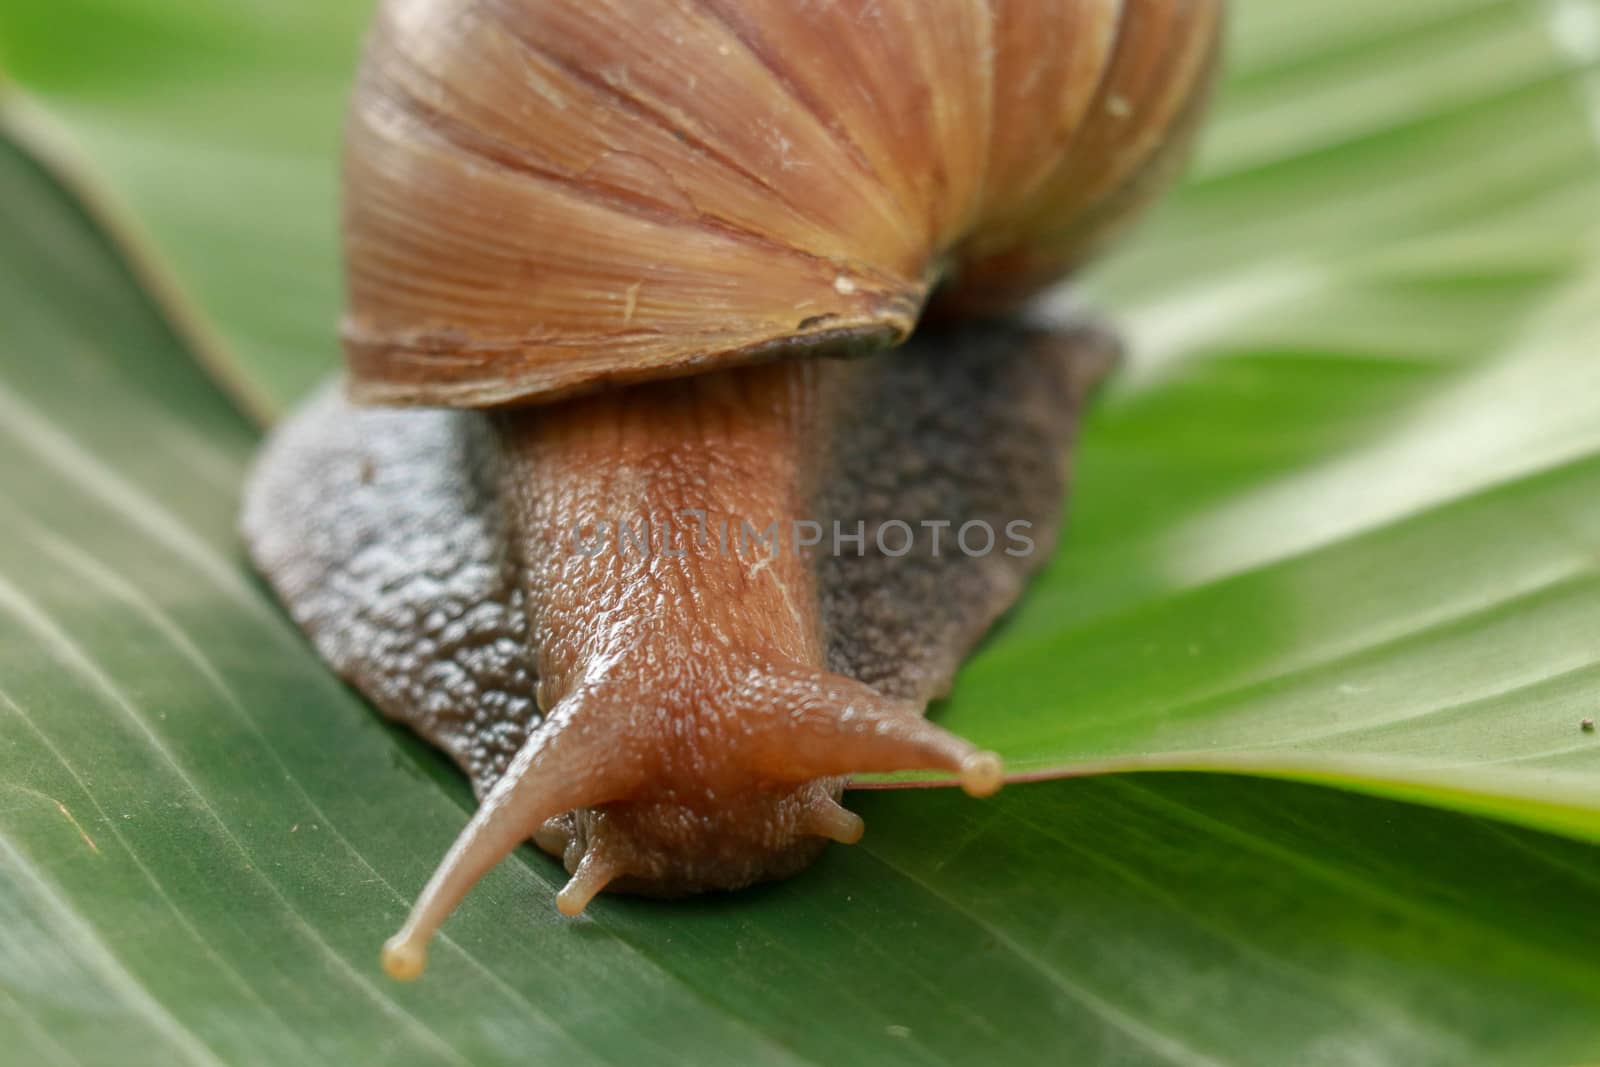 A large brown snail, Giant African snail, Achatina fulica, Lissachatina fulica, creeps on the green wet leaf. Horns are visible, close-up by Sanatana2008